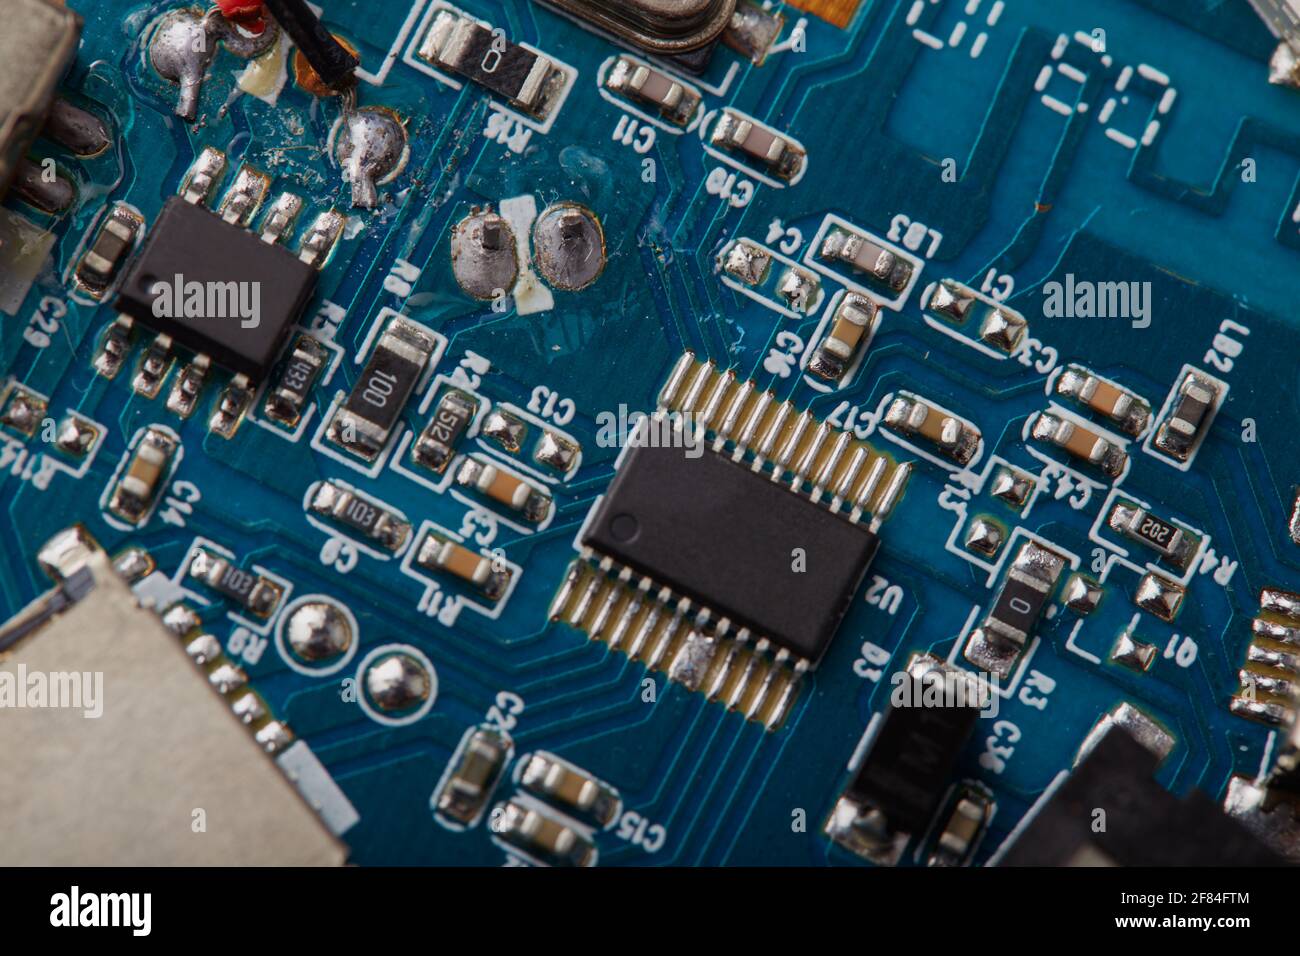 Electronic circuit board close up details. Stock Photo